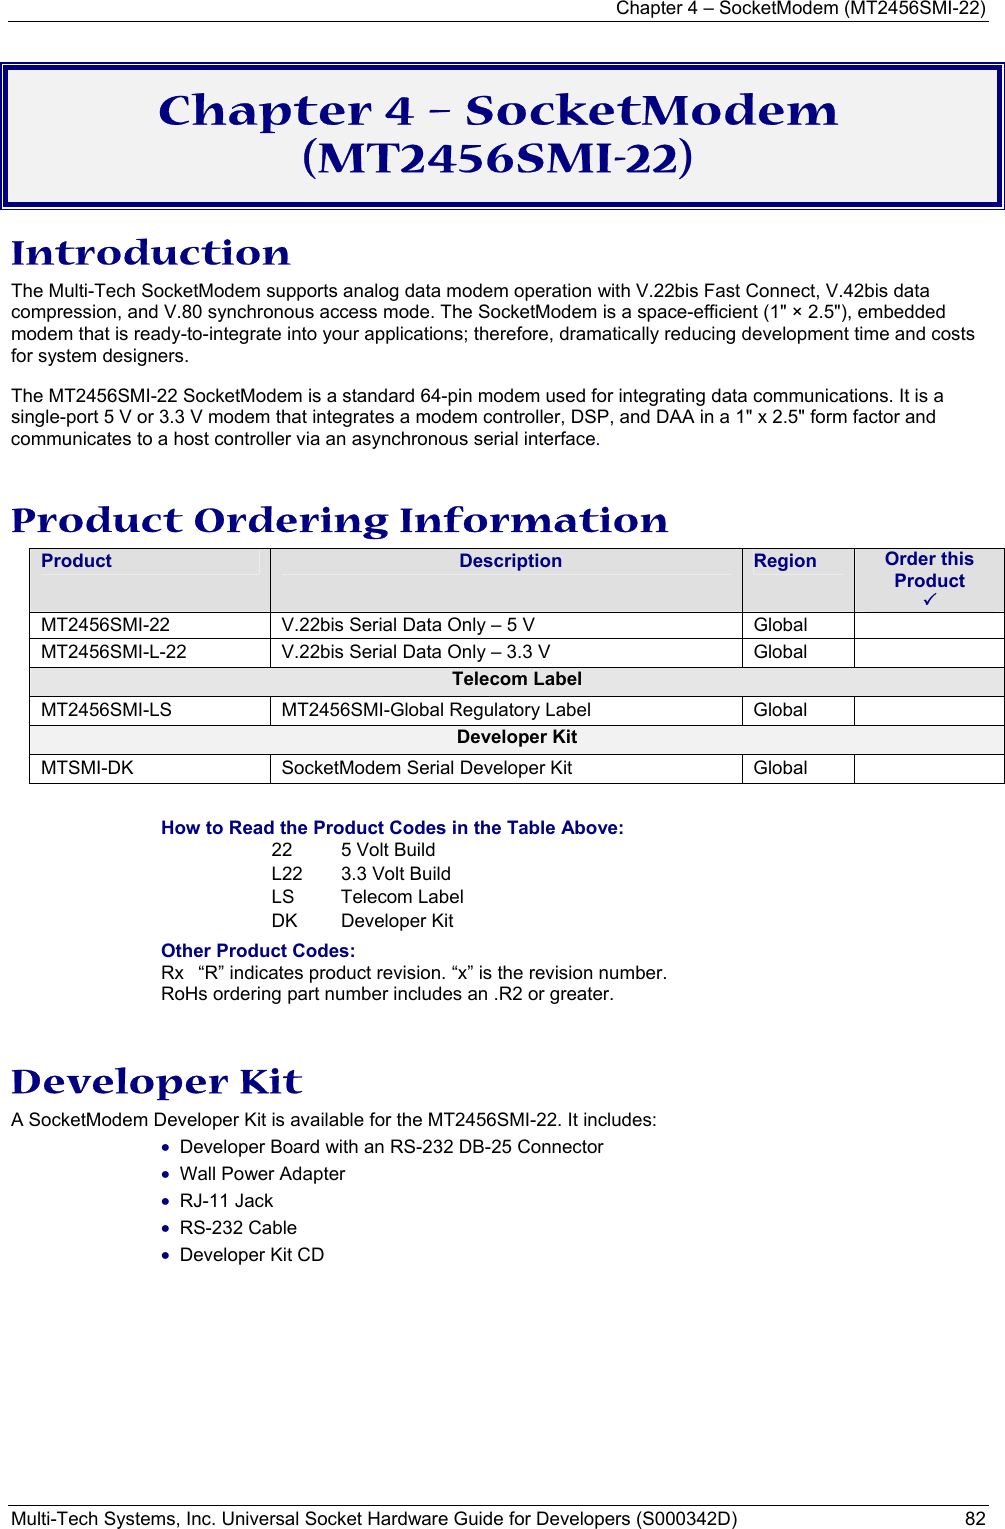 Chapter 4 – SocketModem (MT2456SMI-22) Multi-Tech Systems, Inc. Universal Socket Hardware Guide for Developers (S000342D)  82  Chapter 4 – SocketModem (MT2456SMI-22) Introduction The Multi-Tech SocketModem supports analog data modem operation with V.22bis Fast Connect, V.42bis data compression, and V.80 synchronous access mode. The SocketModem is a space-efficient (1&quot; × 2.5&quot;), embedded modem that is ready-to-integrate into your applications; therefore, dramatically reducing development time and costs for system designers.  The MT2456SMI-22 SocketModem is a standard 64-pin modem used for integrating data communications. It is a single-port 5 V or 3.3 V modem that integrates a modem controller, DSP, and DAA in a 1&quot; x 2.5&quot; form factor and communicates to a host controller via an asynchronous serial interface.  Product Ordering Information Product  Description  Region  Order this Product  3 MT2456SMI-22  V.22bis Serial Data Only – 5 V          Global   MT2456SMI-L-22  V.22bis Serial Data Only – 3.3 V        Global   Telecom Label MT2456SMI-LS  MT2456SMI-Global Regulatory Label  Global   Developer Kit MTSMI-DK SocketModem Serial Developer Kit  Global    How to Read the Product Codes in the Table Above: 22  5 Volt Build L22  3.3 Volt Build LS Telecom Label DK Developer Kit Other Product Codes: Rx  “R” indicates product revision. “x” is the revision number. RoHs ordering part number includes an .R2 or greater.  Developer Kit A SocketModem Developer Kit is available for the MT2456SMI-22. It includes: • Developer Board with an RS-232 DB-25 Connector • Wall Power Adapter • RJ-11 Jack • RS-232 Cable • Developer Kit CD    